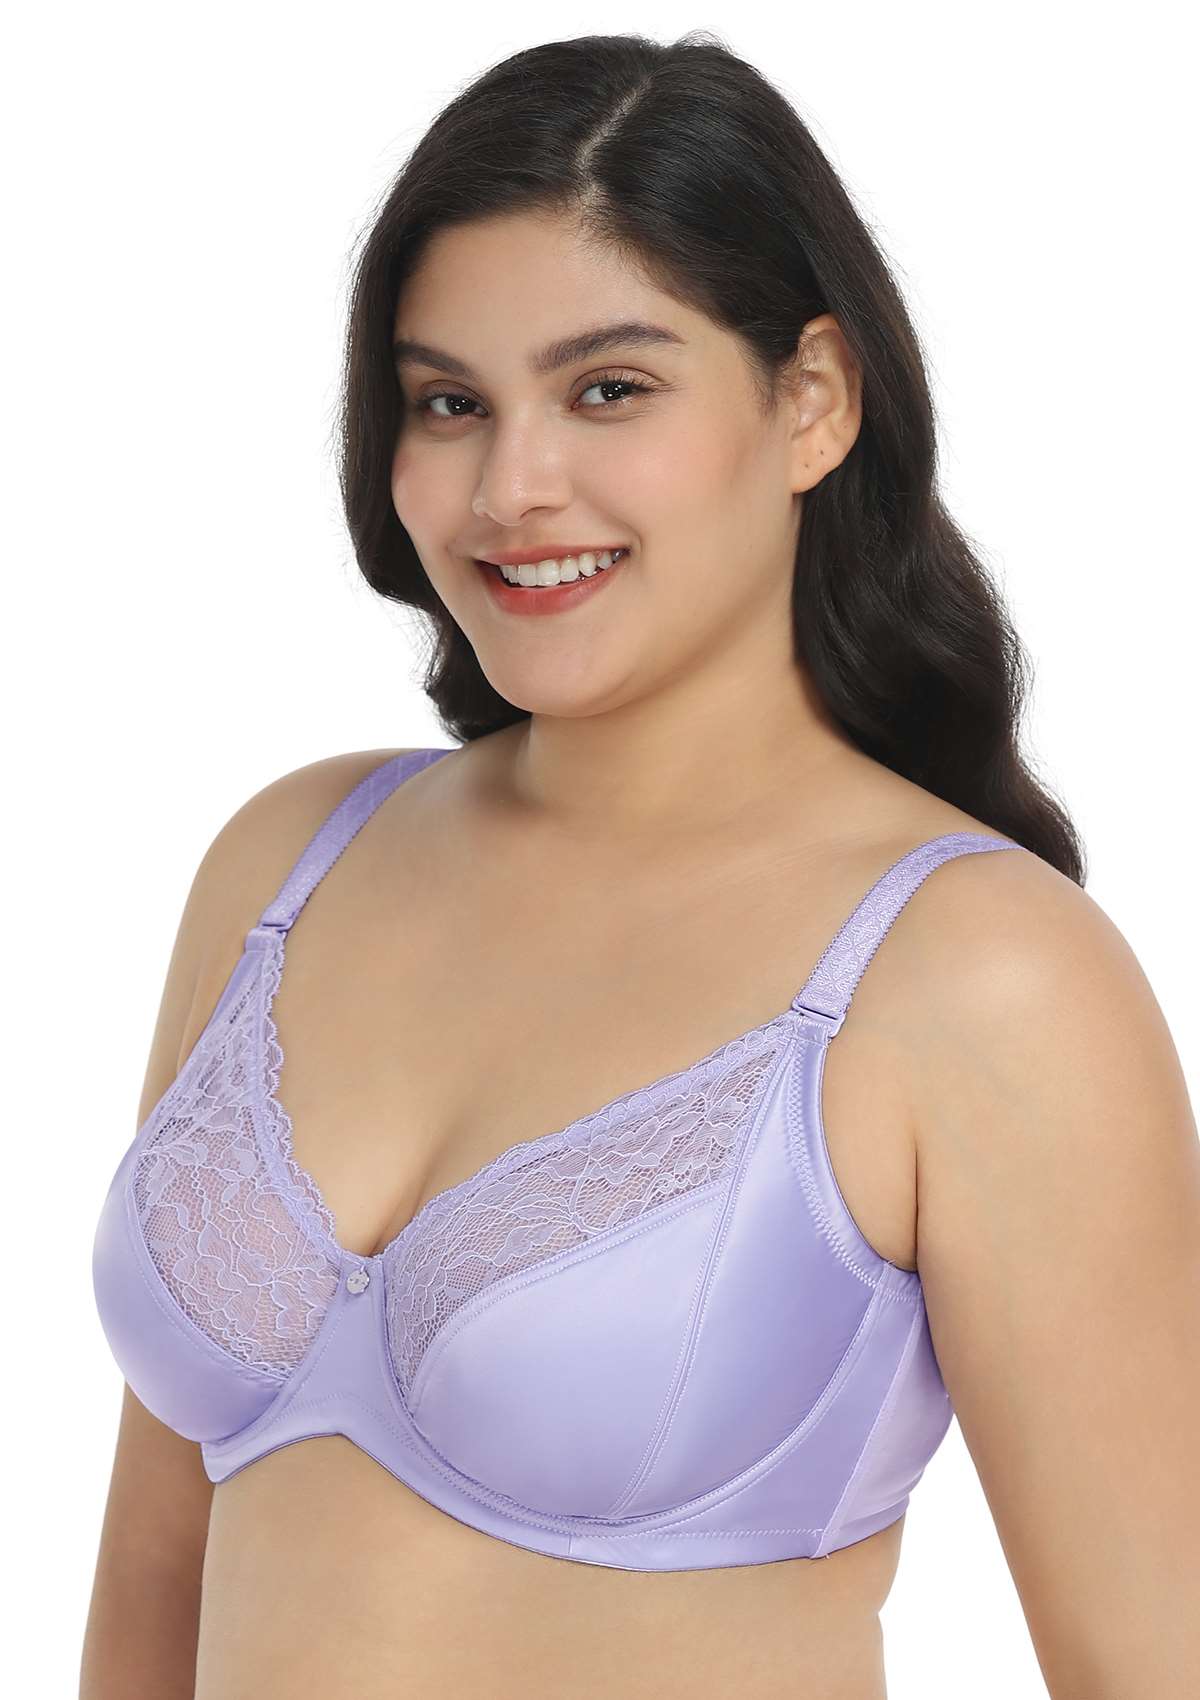 HSIA Foxy Satin Silky Full Coverage Underwire Bra With Floral Lace Trim - Champagne / 40 / D